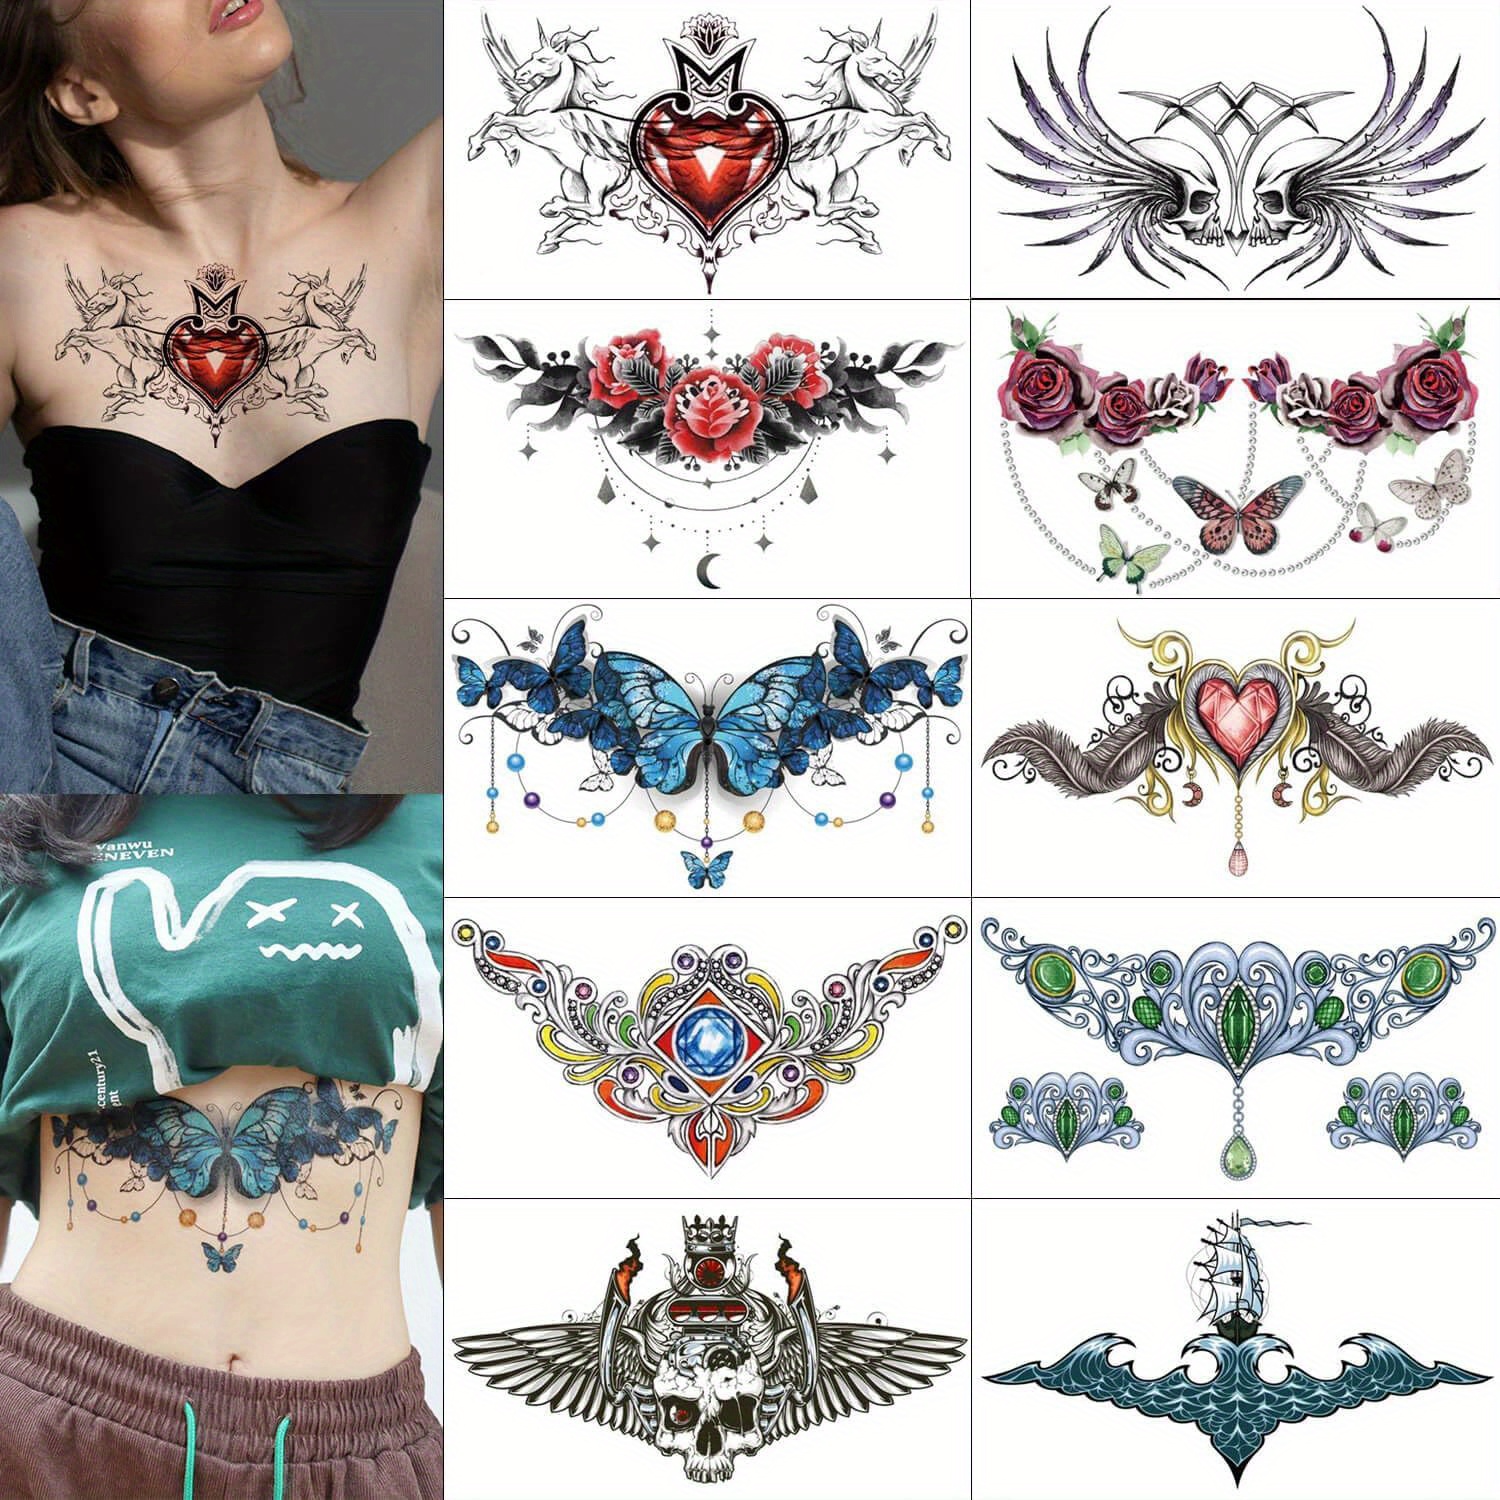 

10 Sheets Chest Underboob Temporary Tattoo For Women, Large Floral Fake Realistic Tattoos, Long-lasting Creative Removable Tattoo Stickers, Butterfly Tramp Stamp Stickers, Body Art Decorations